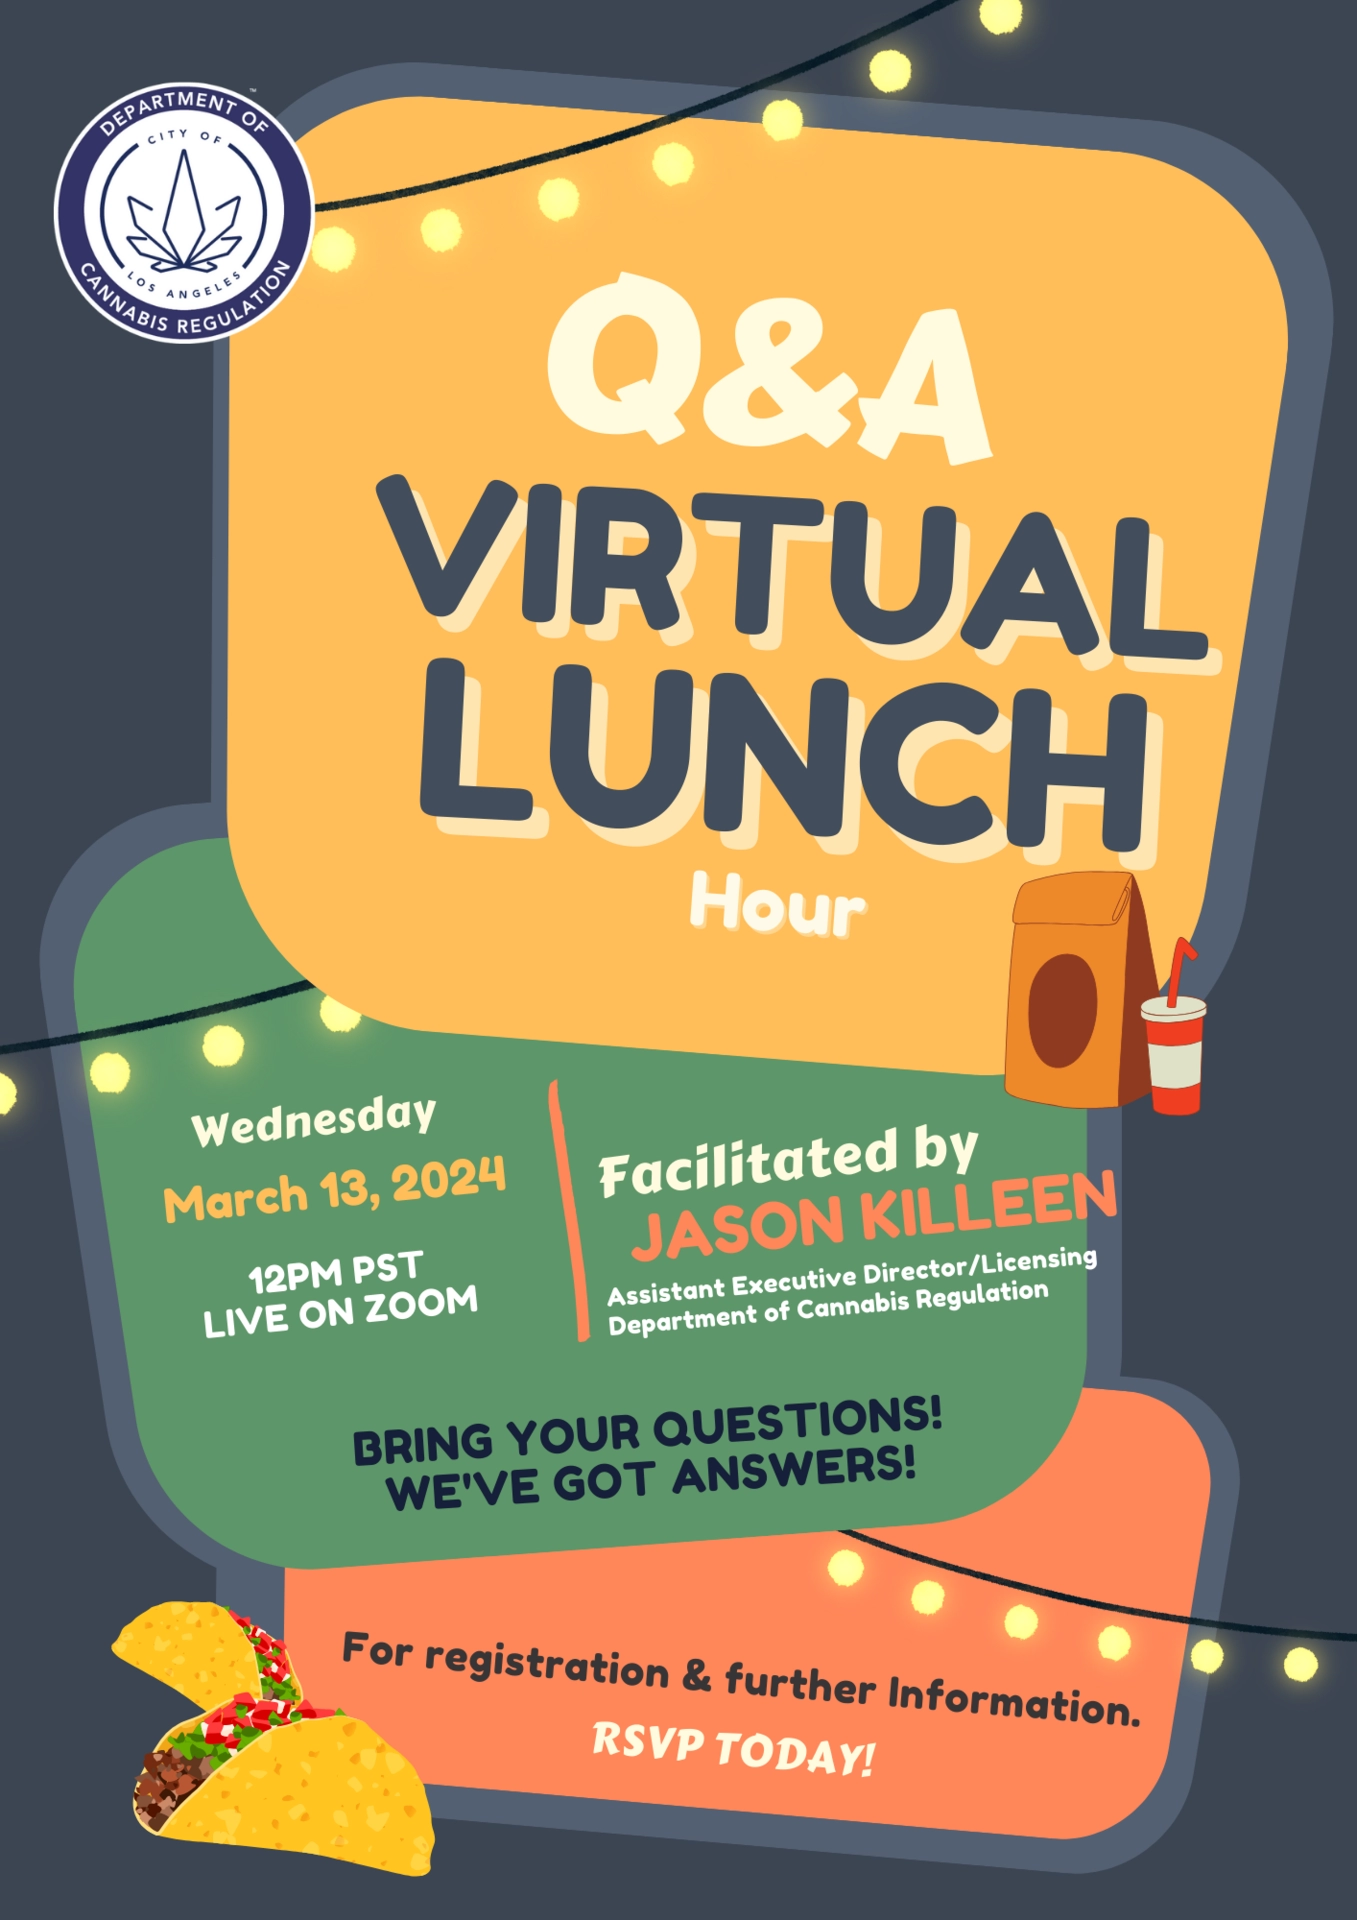 Poster for the Q&A Virtual Lunch Hour on March 13, 2024